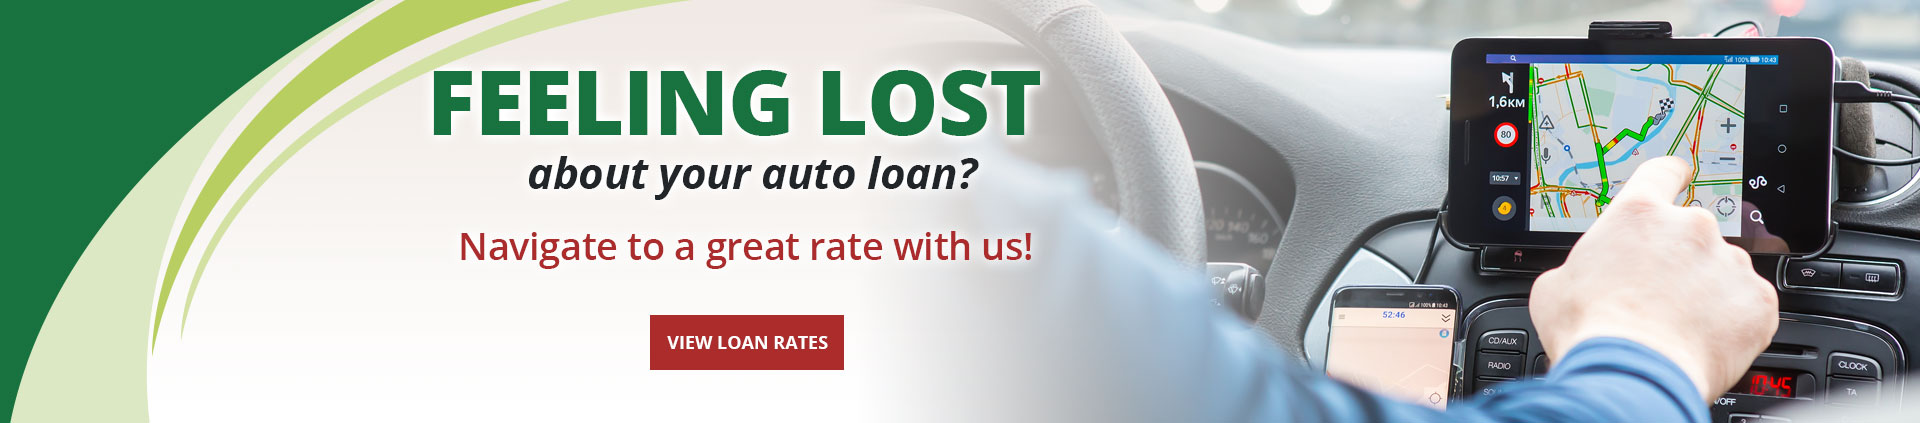 Feeling lost about your auto loan? Navigate to a great rate with us! Learn More
